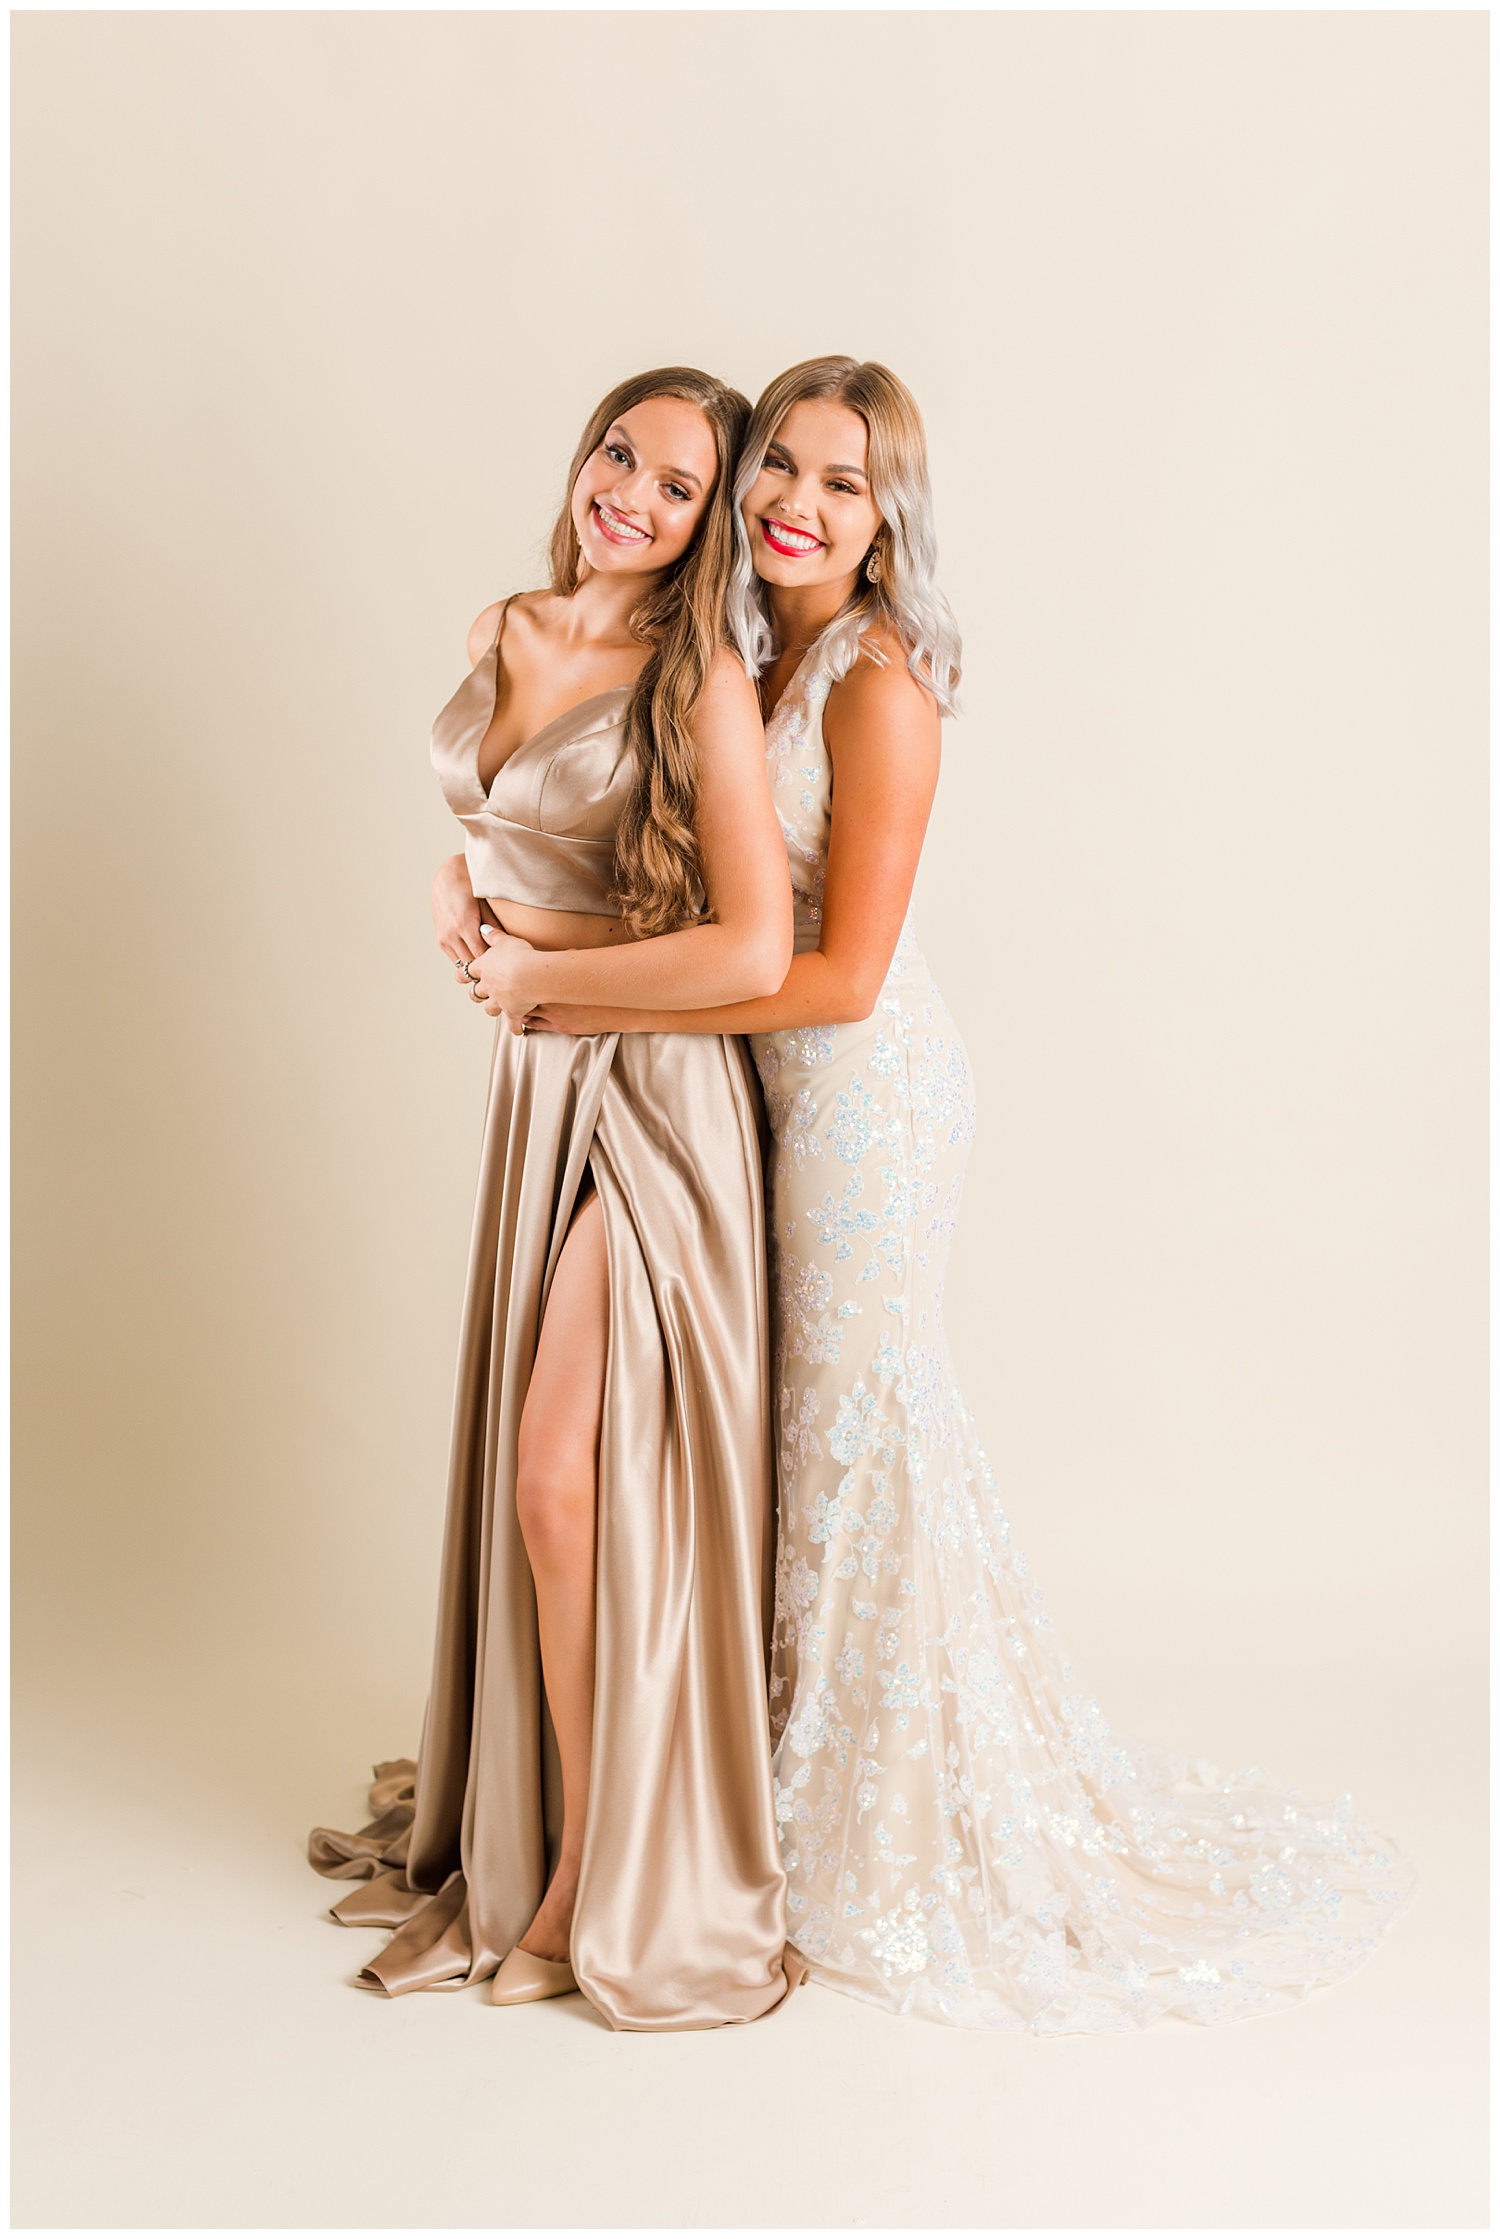 Addison poses in a Colette prom dress and Kennedy in a Sherri Hill prom dress for a magazine cover | CB Studio